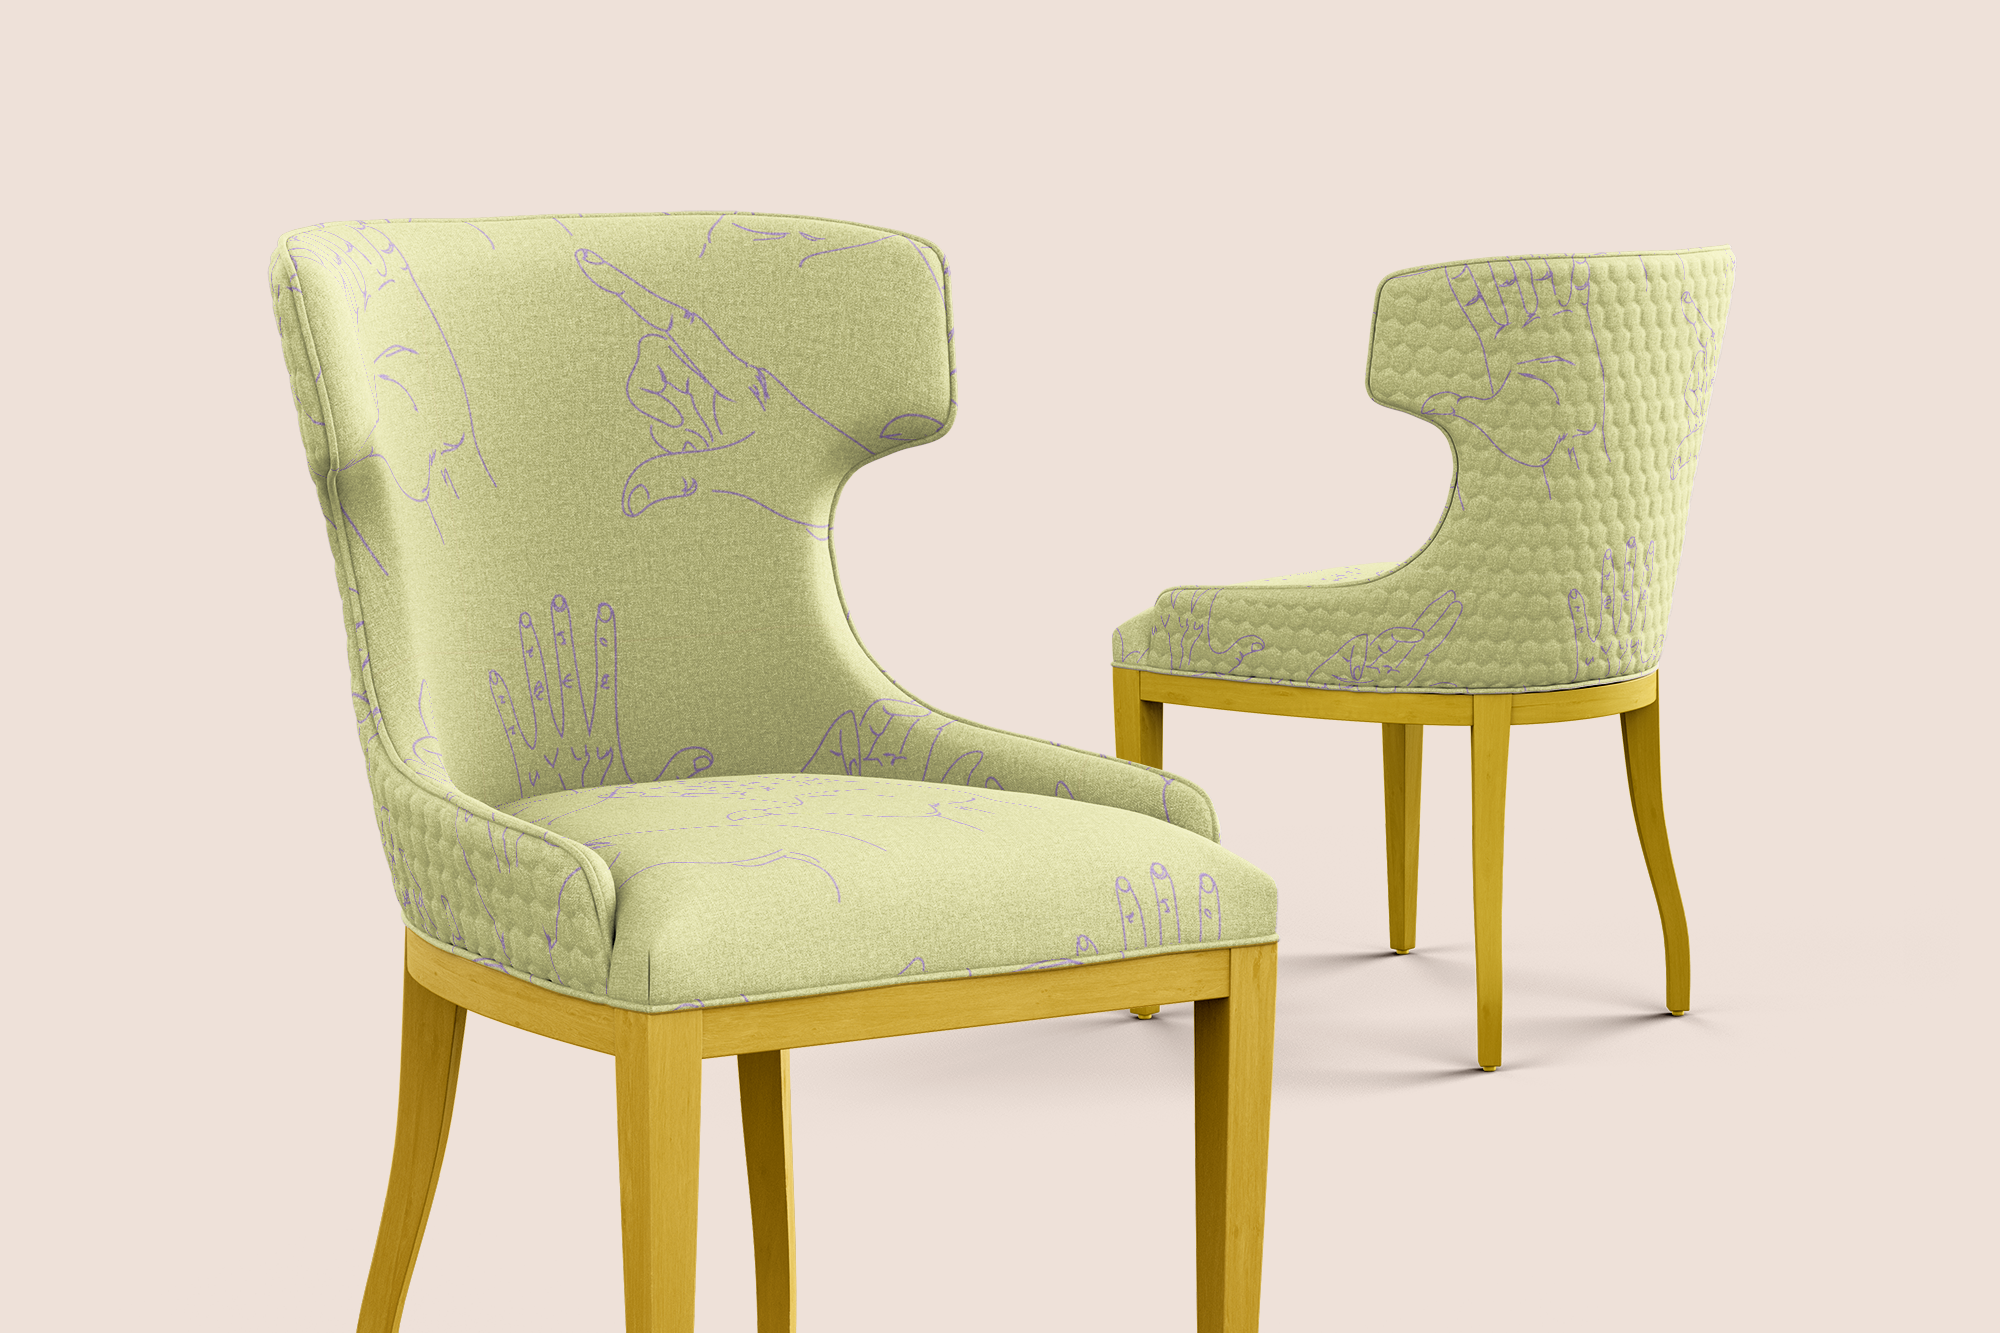 Gestures trendy in yellow pattern design printed on recycled fabric upholstery mockup